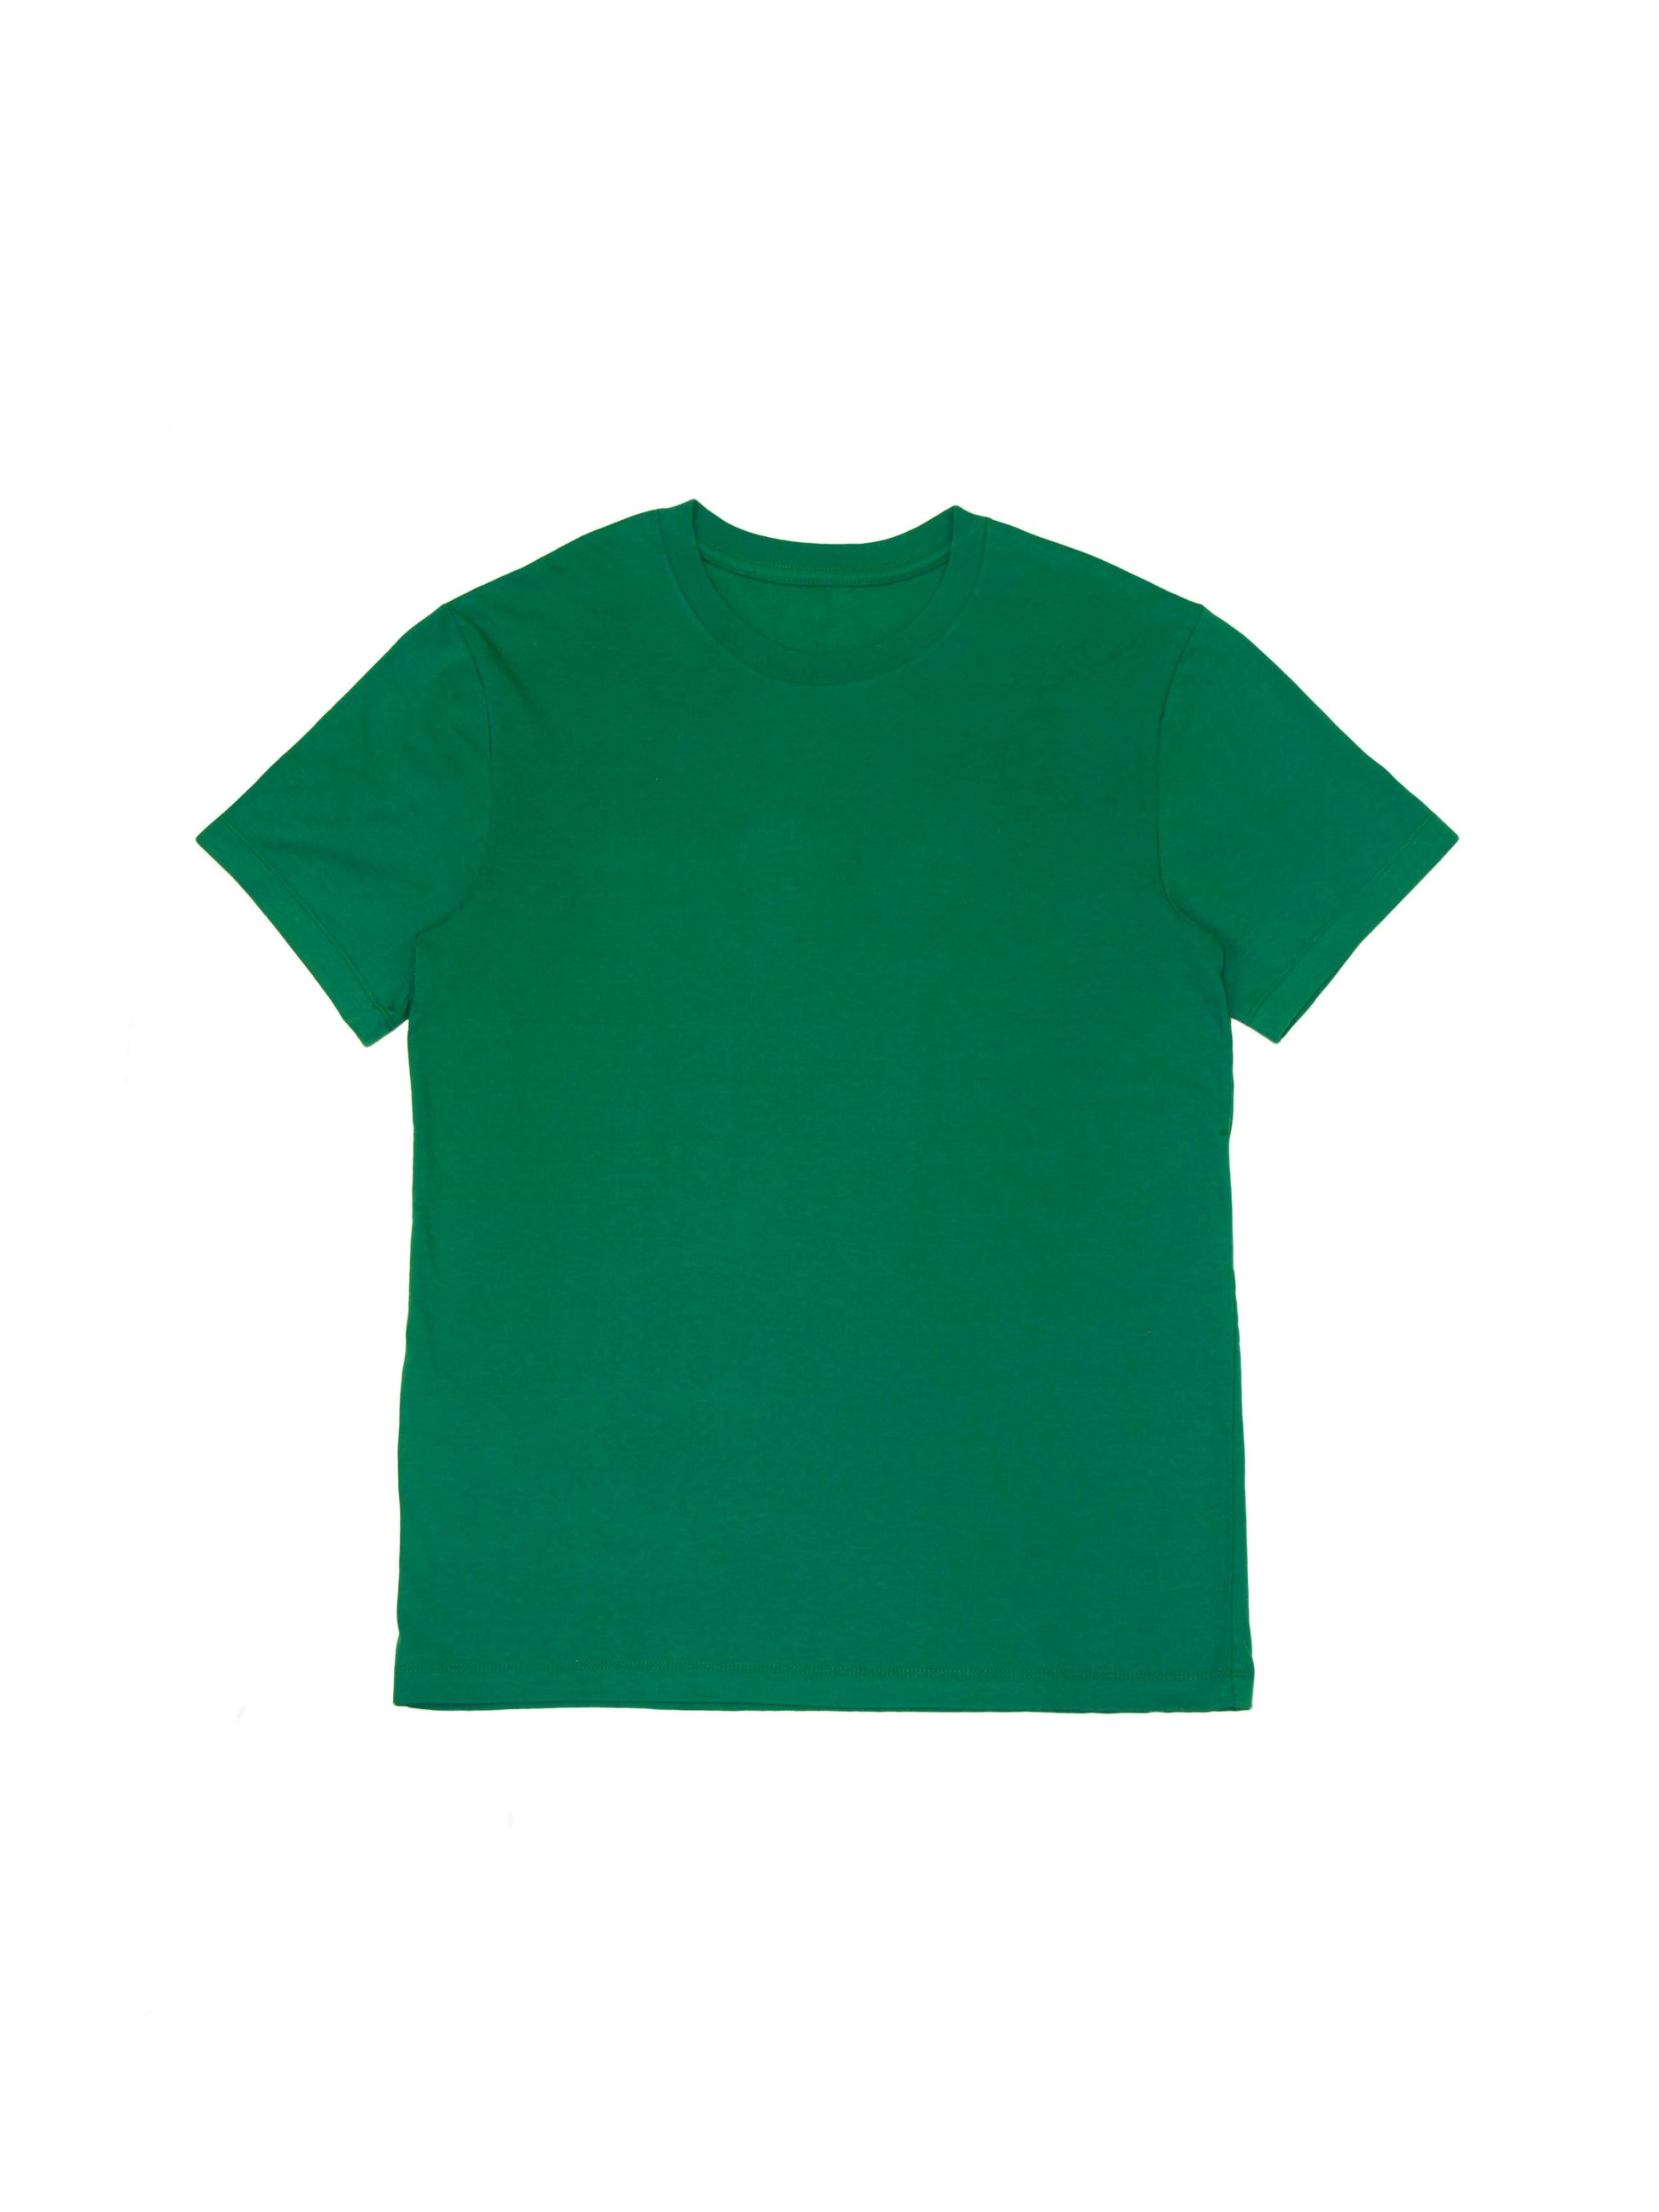 Emerald Green T-Shirt in Trendy Boxy Fit